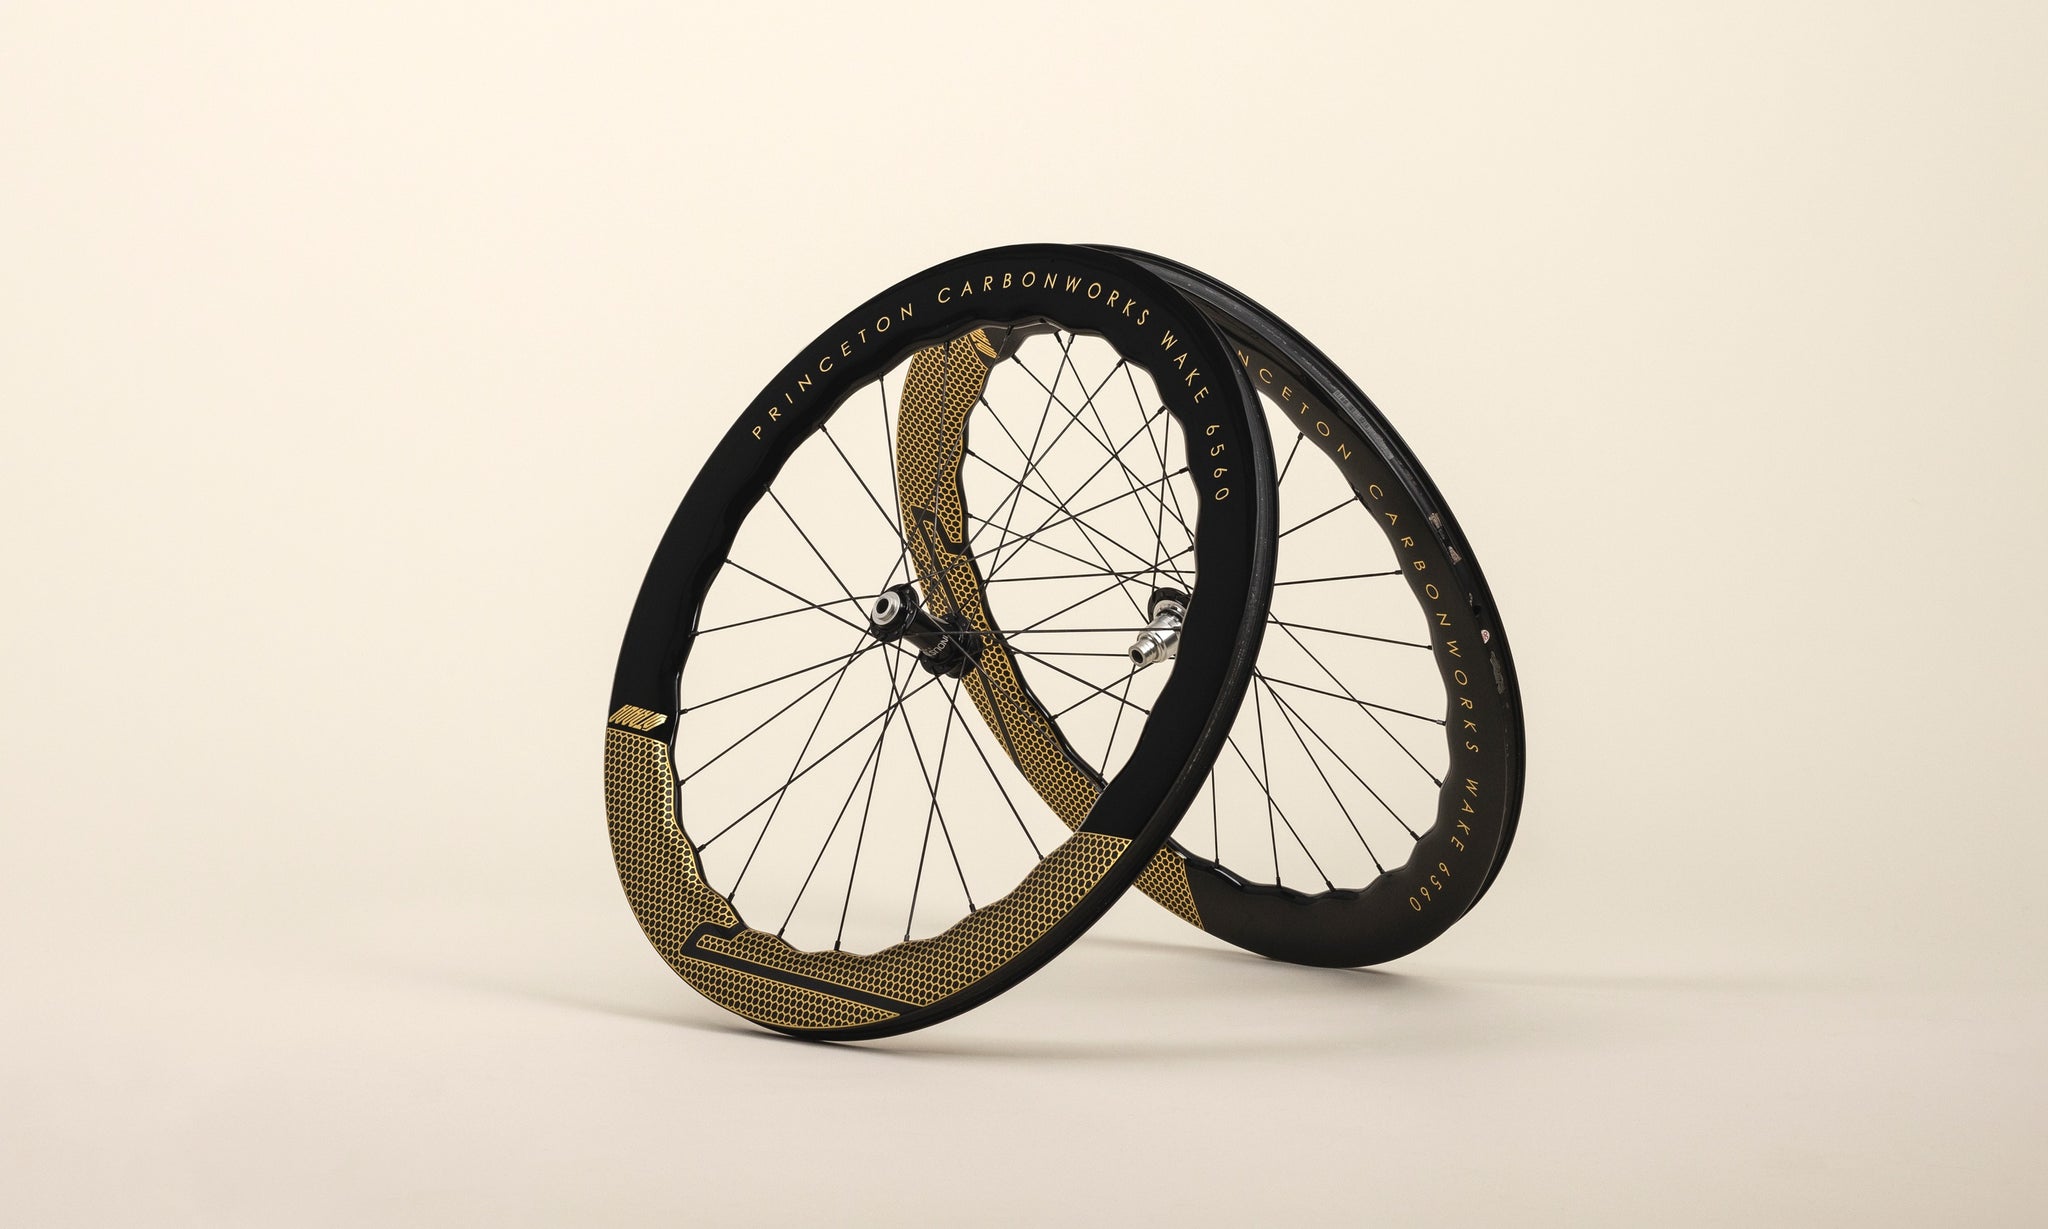 Princeton Wake 6560: The Coolest Wheels I Might Never Own